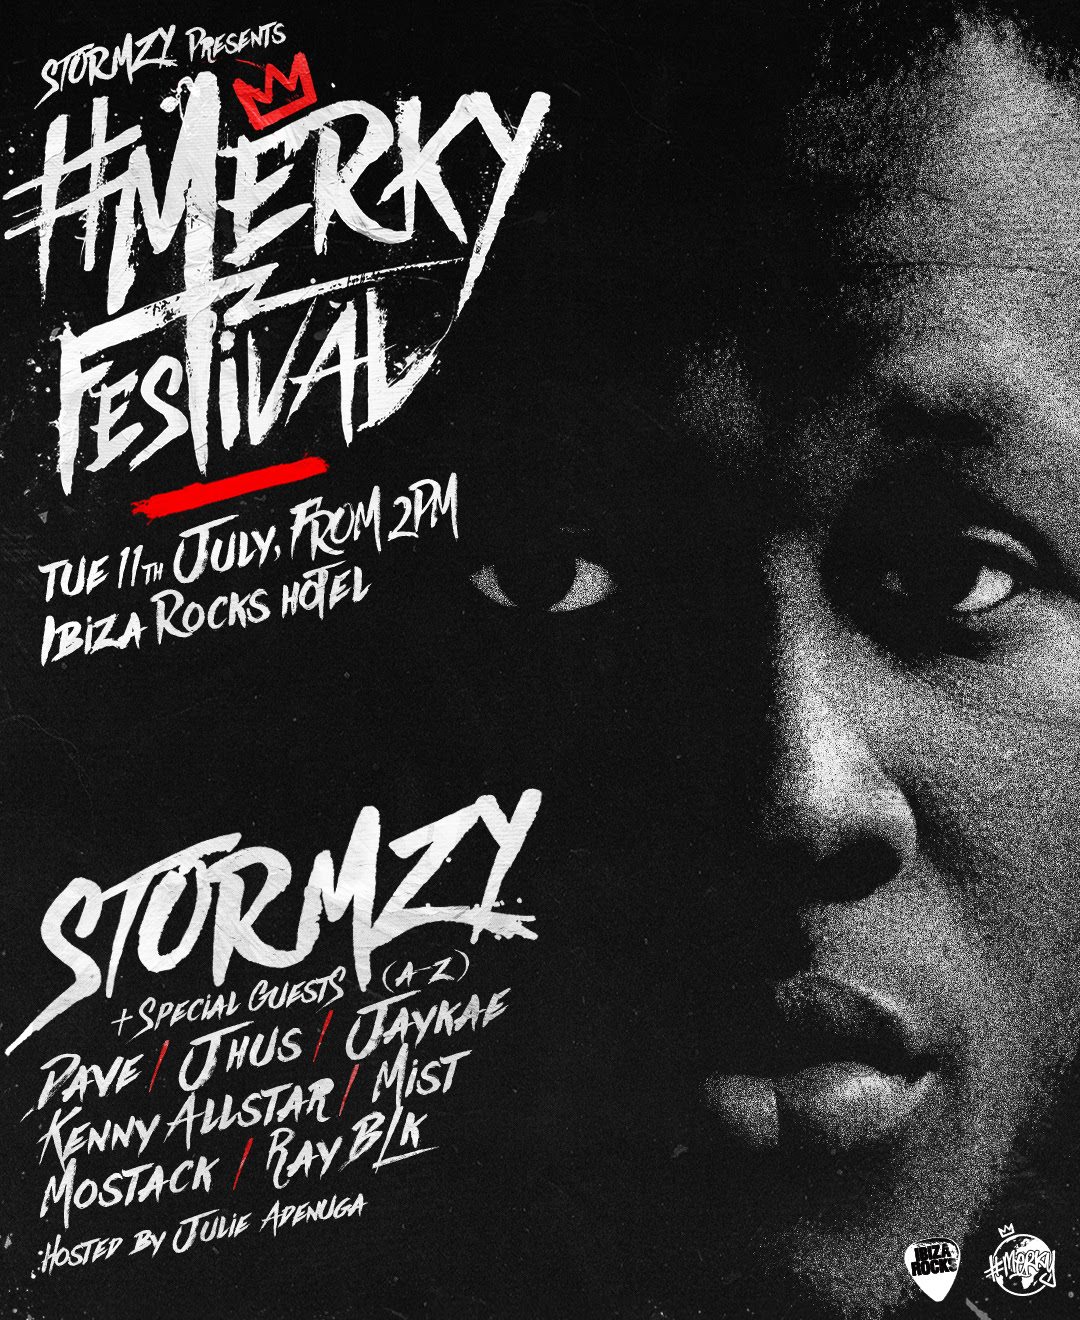 Ibiza rocks reveals its first Grime festival #Merky Full Line Up